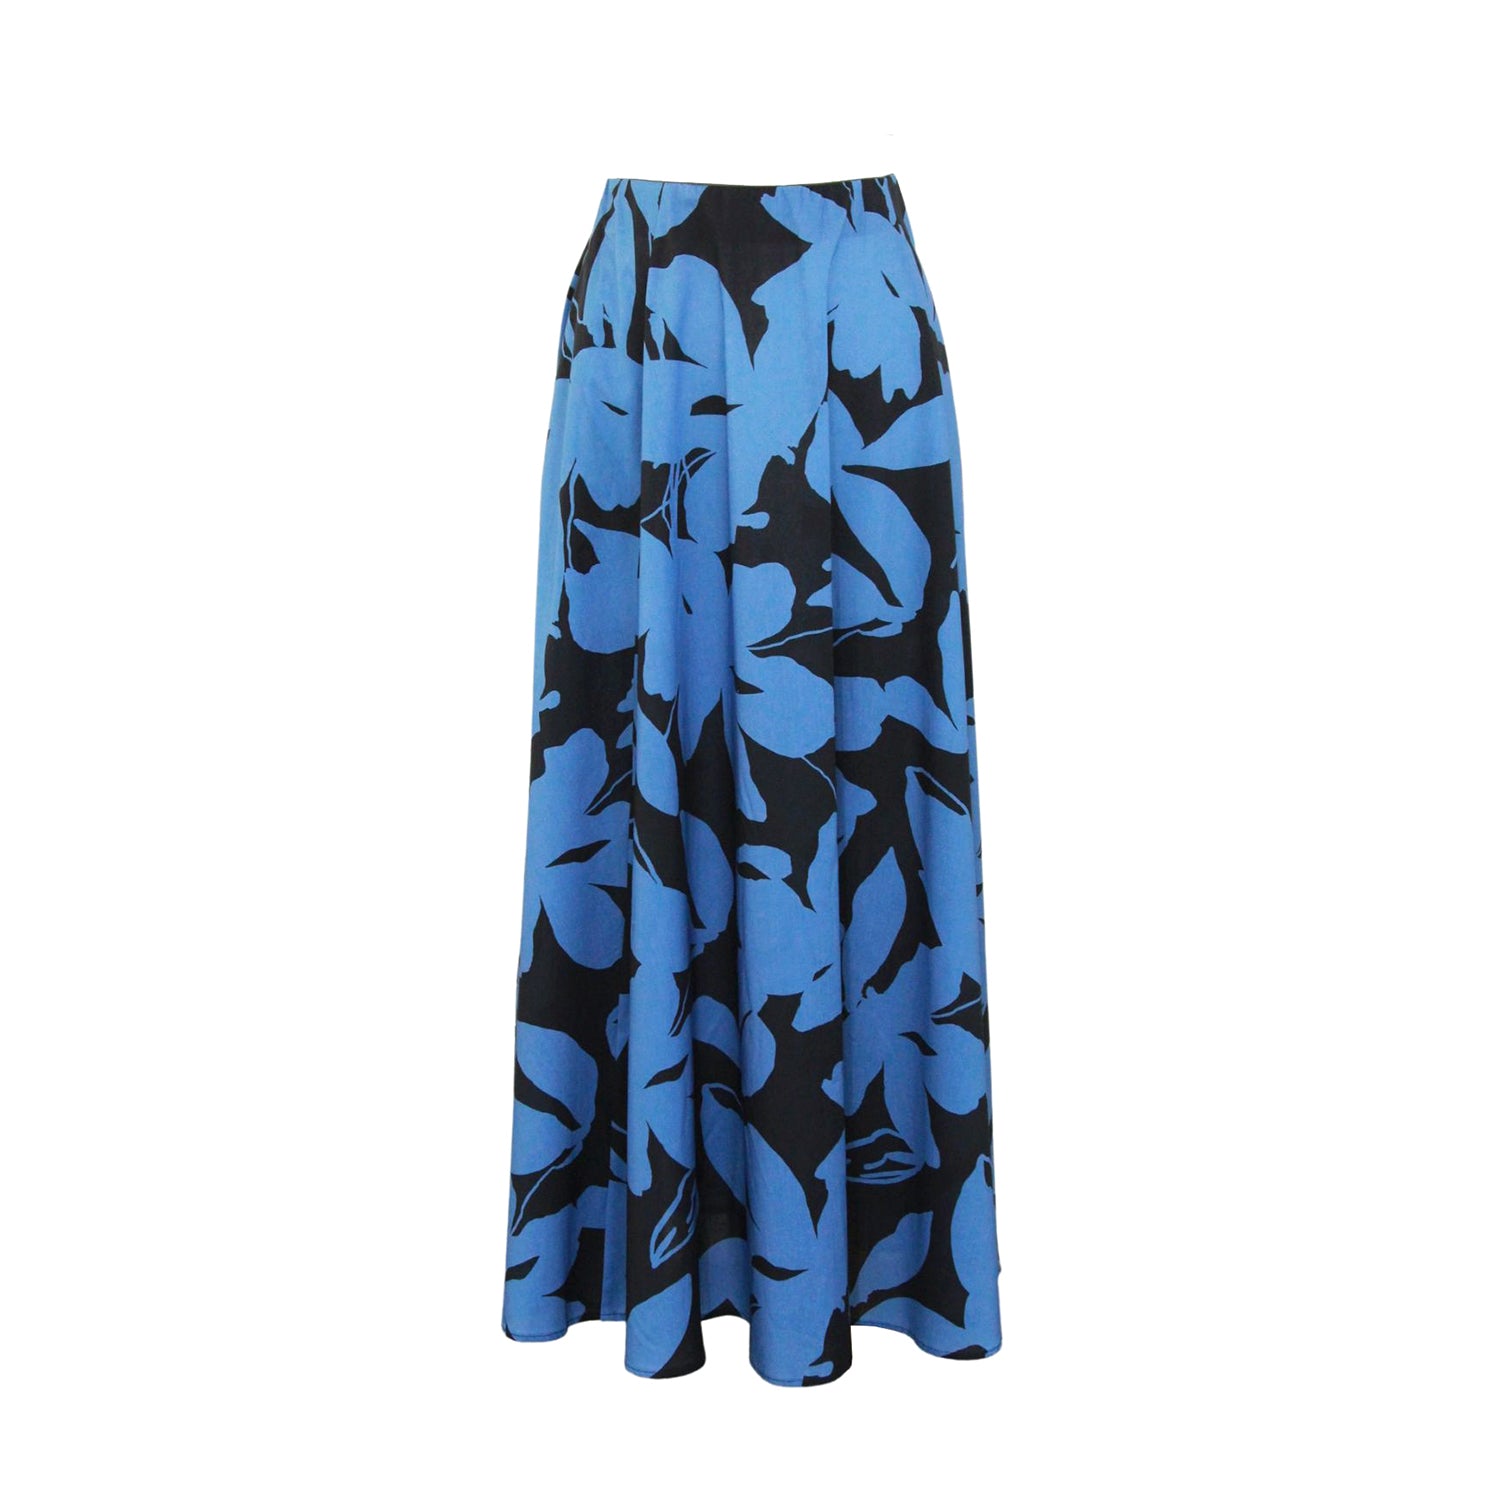 Stylish Cotton Flare Skirt in Gentian Blue